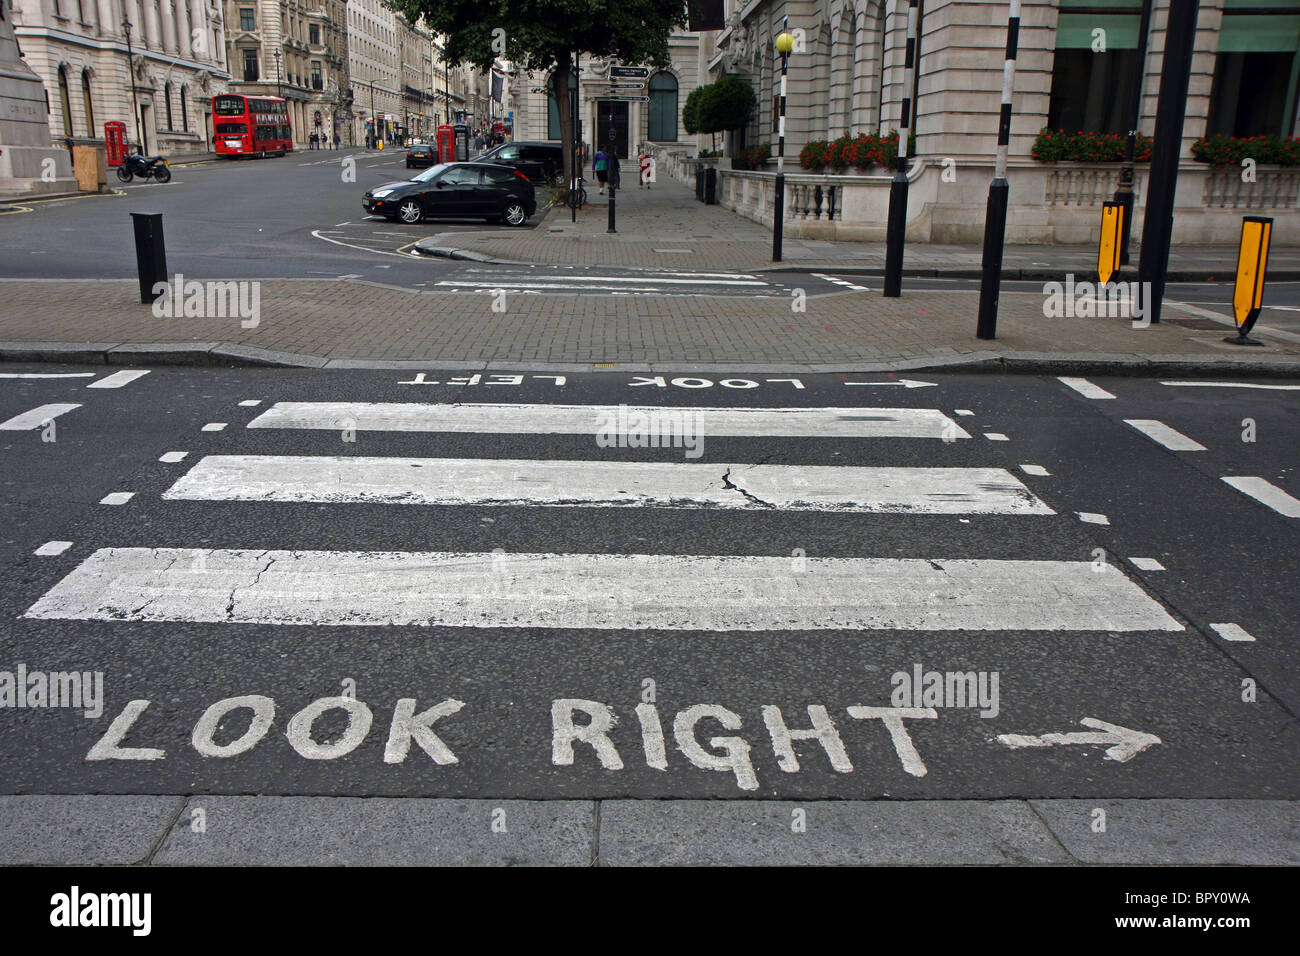 warning-at-crossroad-of-london-to-look-right-and-left-BPY0WA.jpg